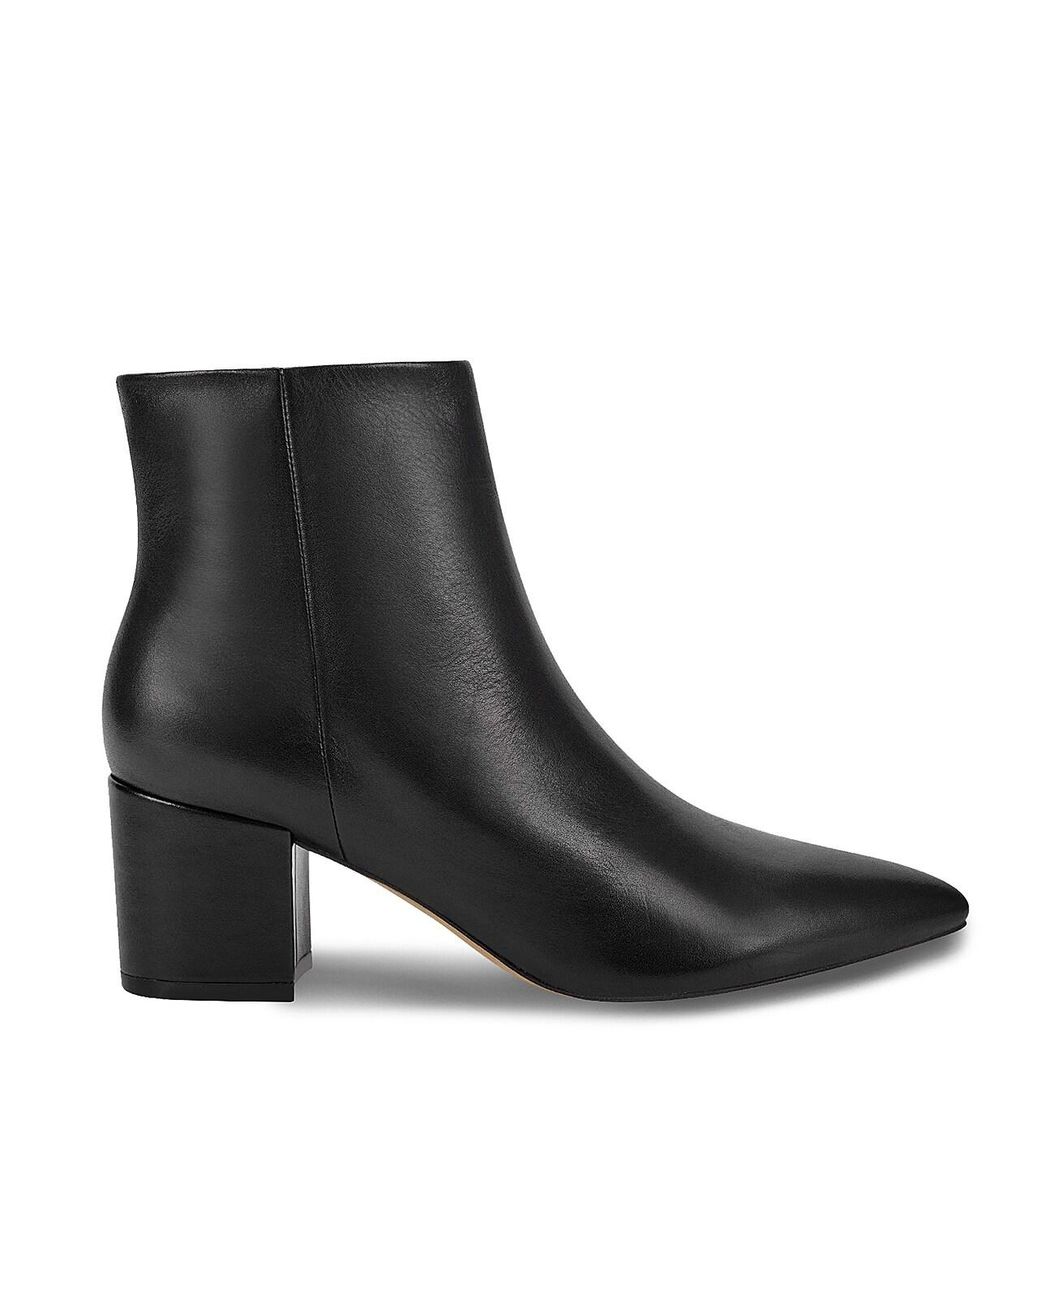 marc fisher jelly bootie black